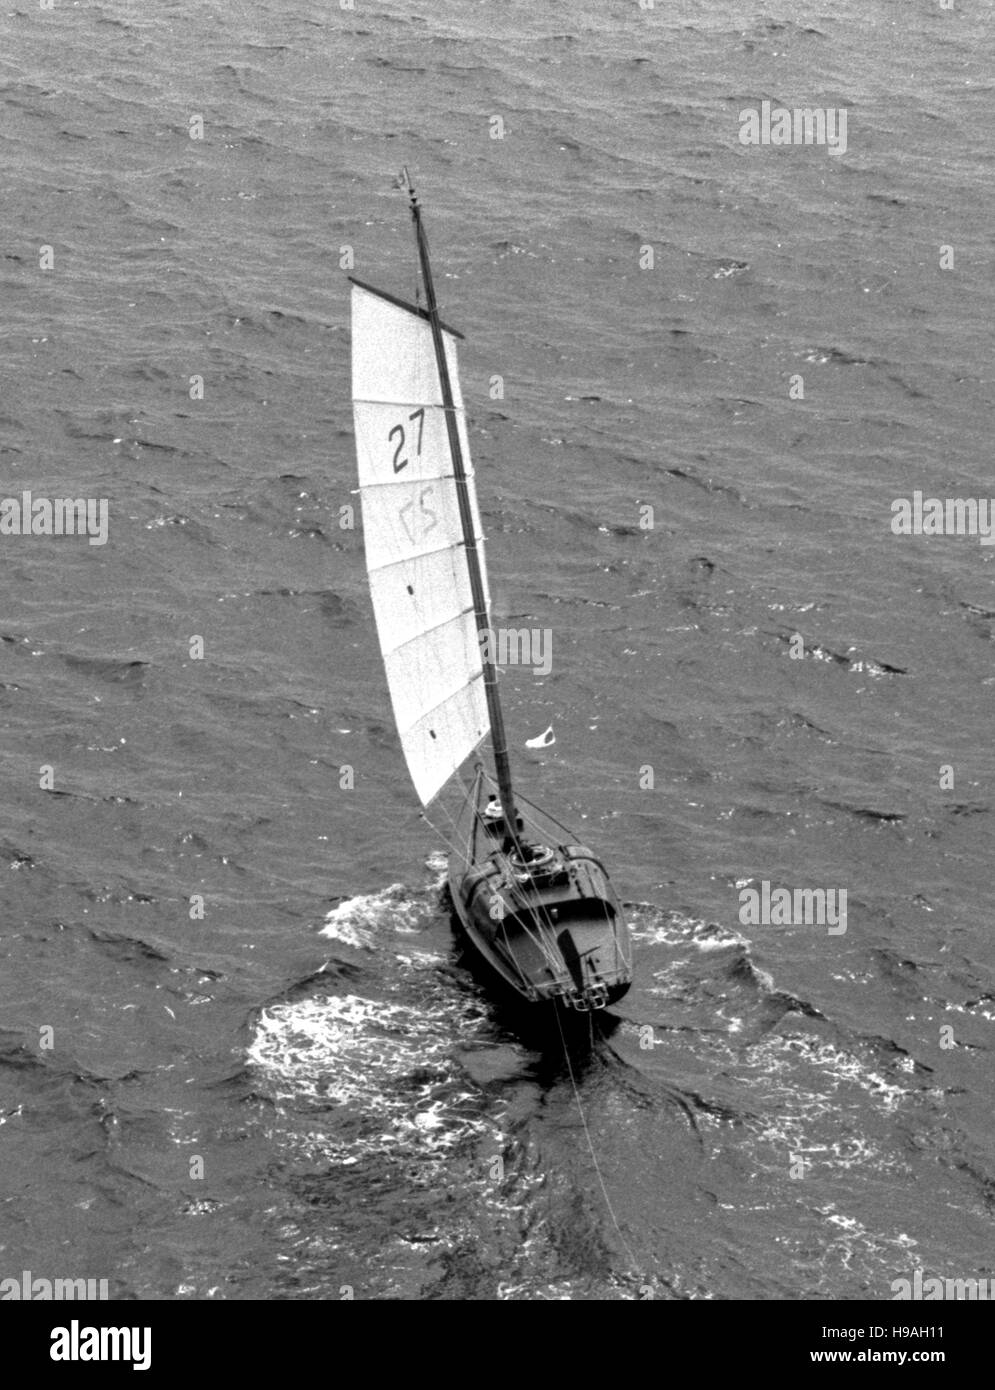 AJAX NEWS PHOTOS. 7TH JUNE, 1980. PLYMOUTH,ENGLAND. - OSTAR START - MIKE RITCHIE SAILING JESTER, ONE OF THE SMALLEST YACHTS IN THE RACE TO NEWPORT R.I.  PHOTO:JONATHAN EASTLAND/AJAX REF:800706 14 Stock Photo